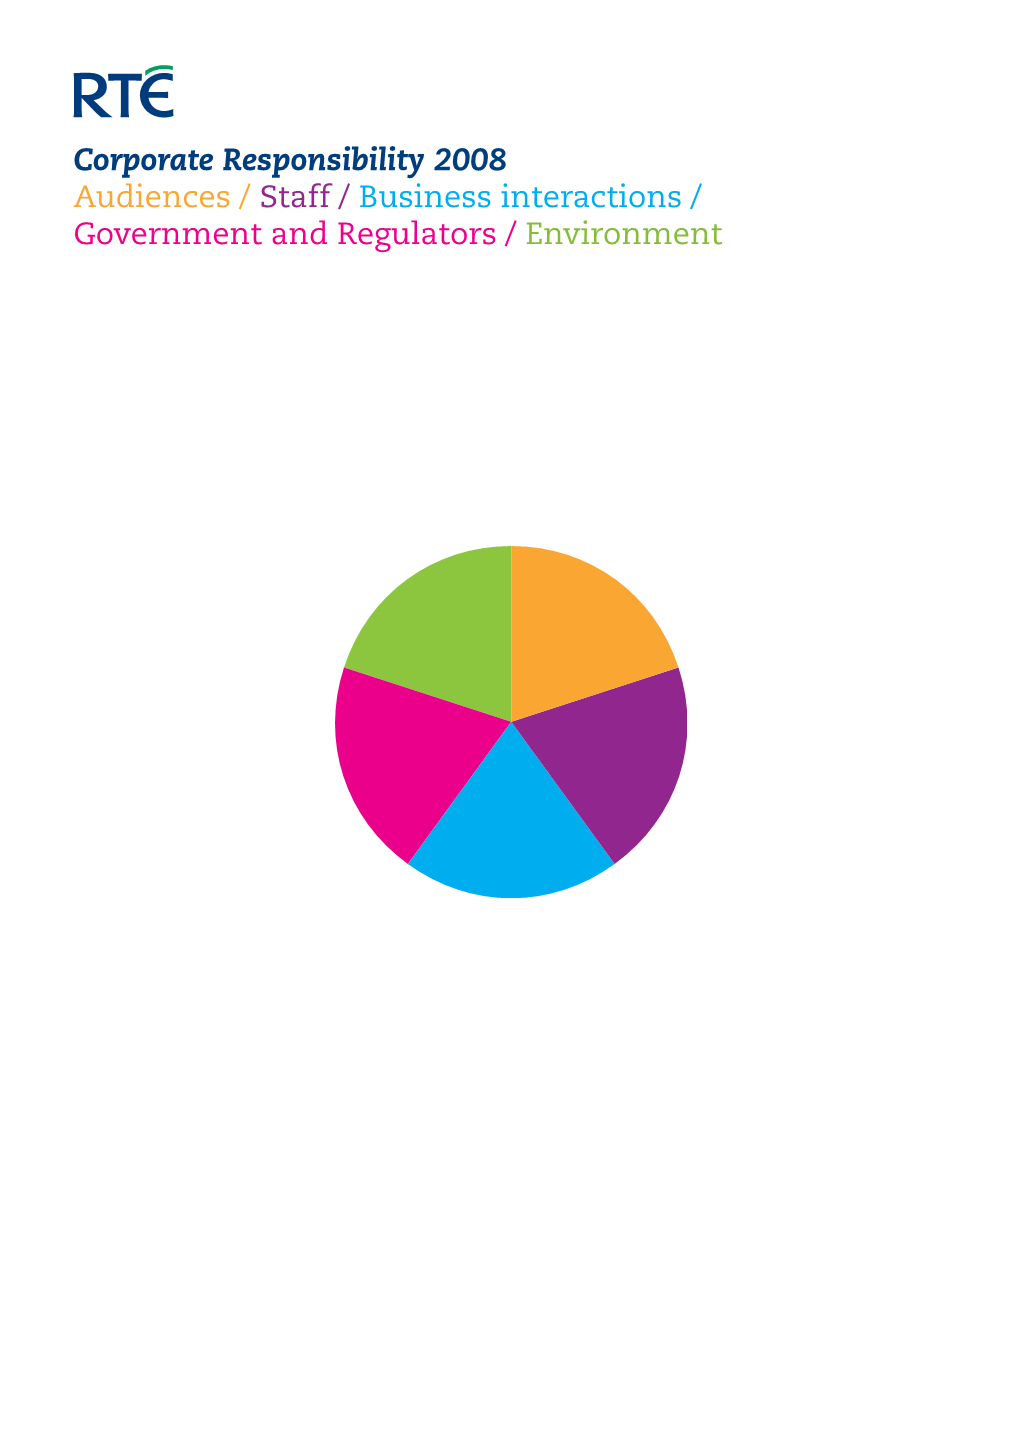 Corporate Responsibility 2008 Audiences / Staff / Business Interactions / Government and Regulators / Environment